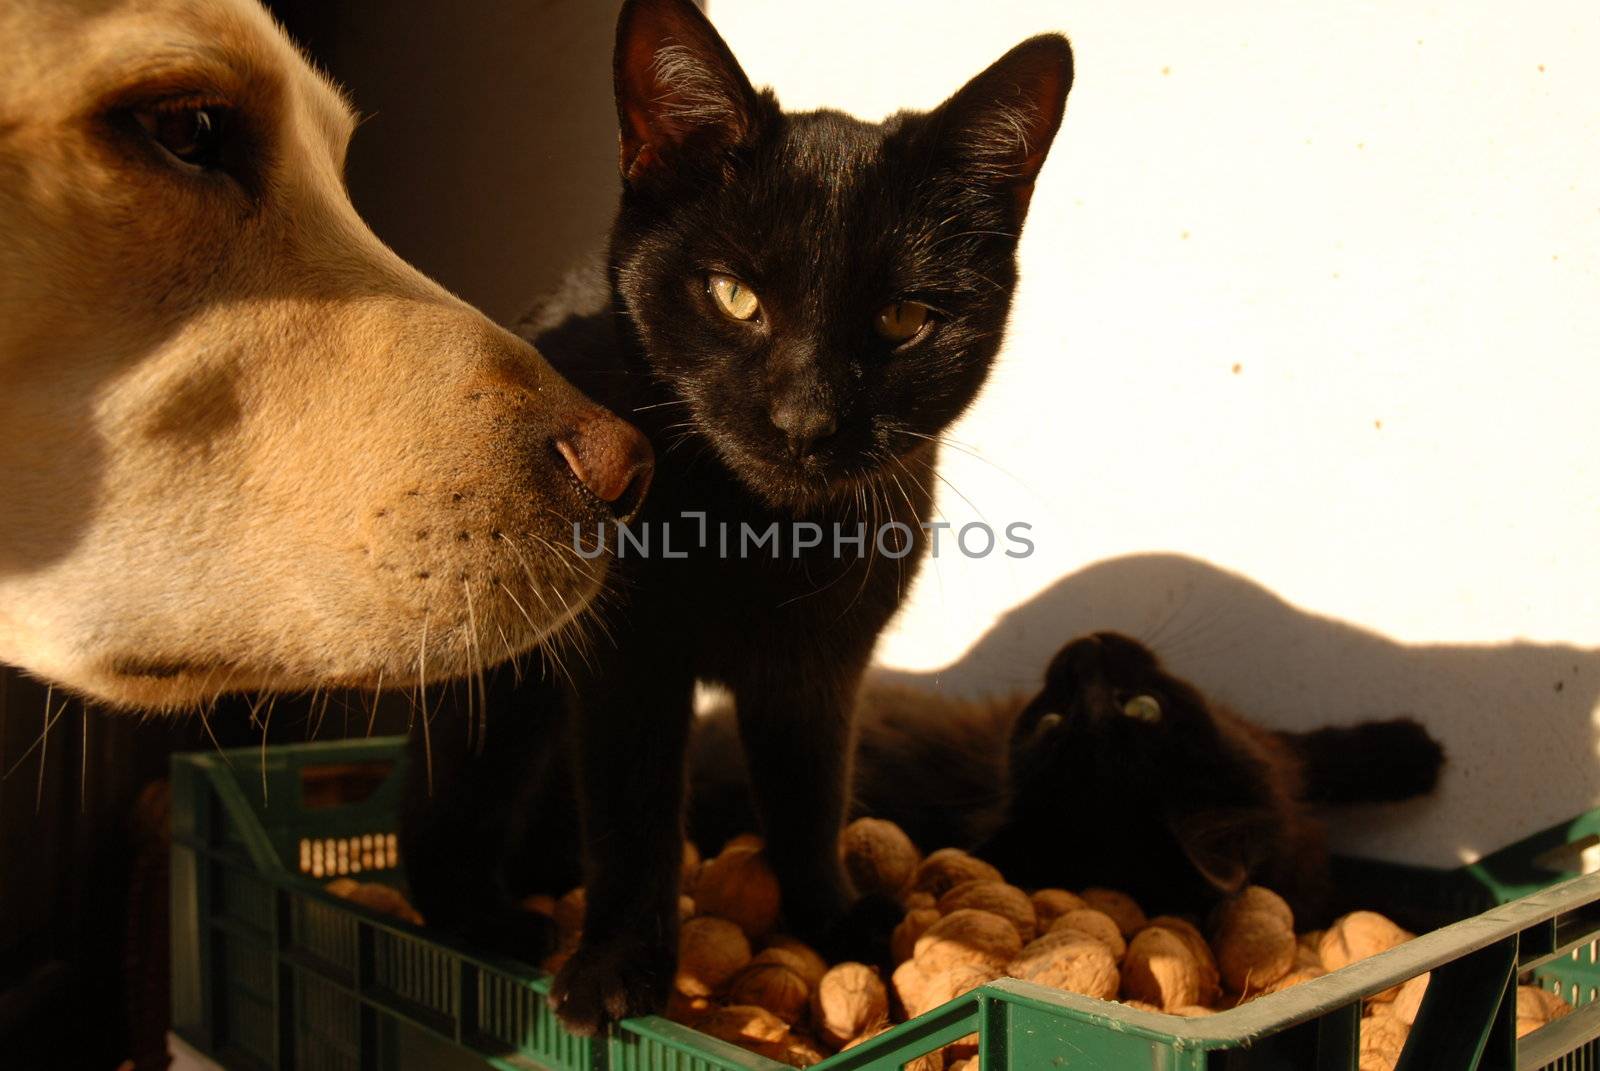 Black cats and dog in walnuts